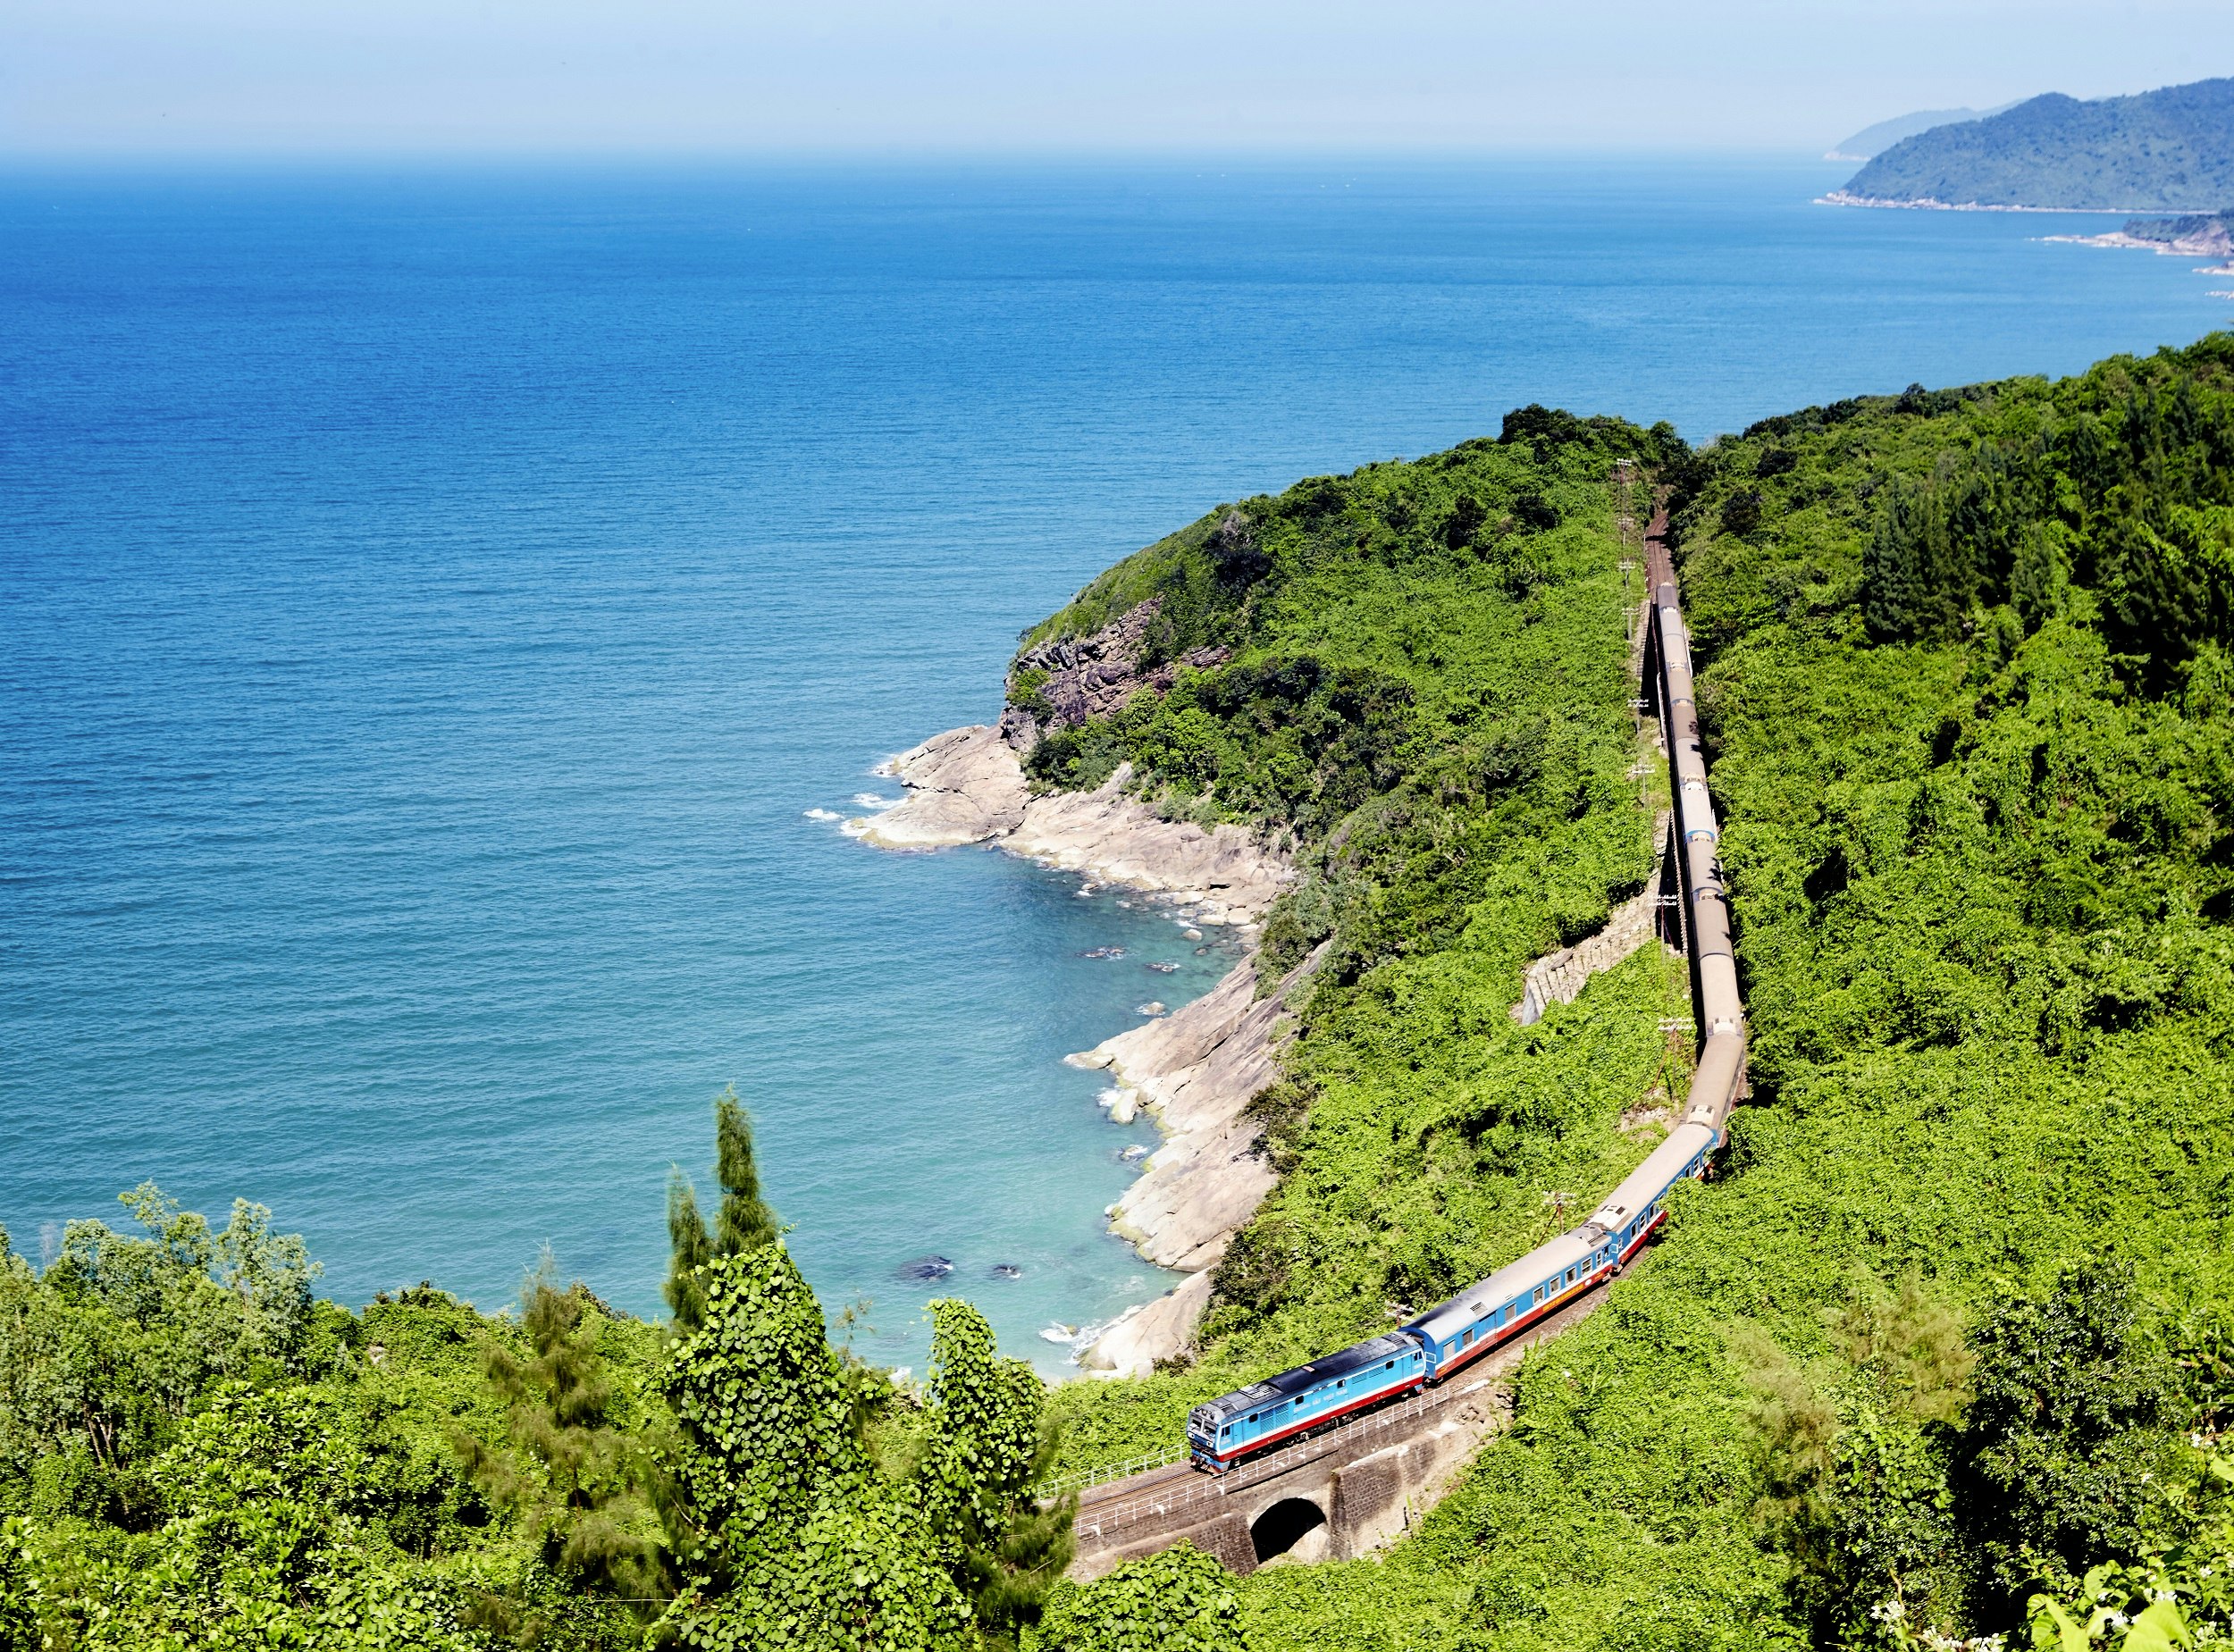 An aerial photograph of a train crossing a small bridge along a heavily forested section of coastline; a deep blue sea sits off the rocky shore that meanders in and out of the image.